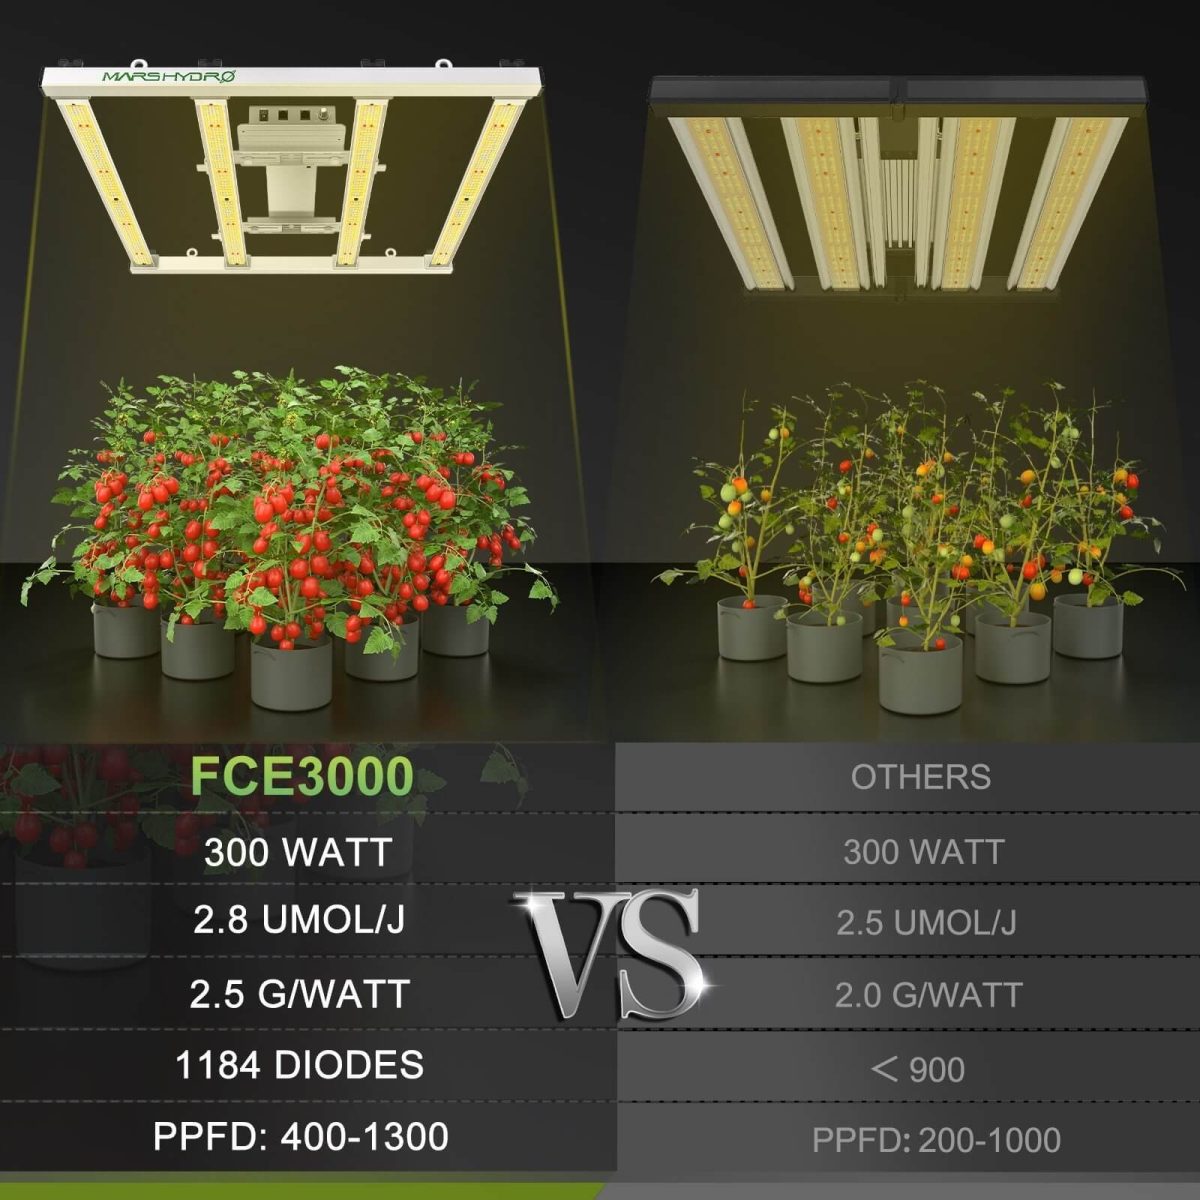 FC-E3000 led grow light performs far better than other 300w lights in PPFD, diode brand, PPE, max yield.